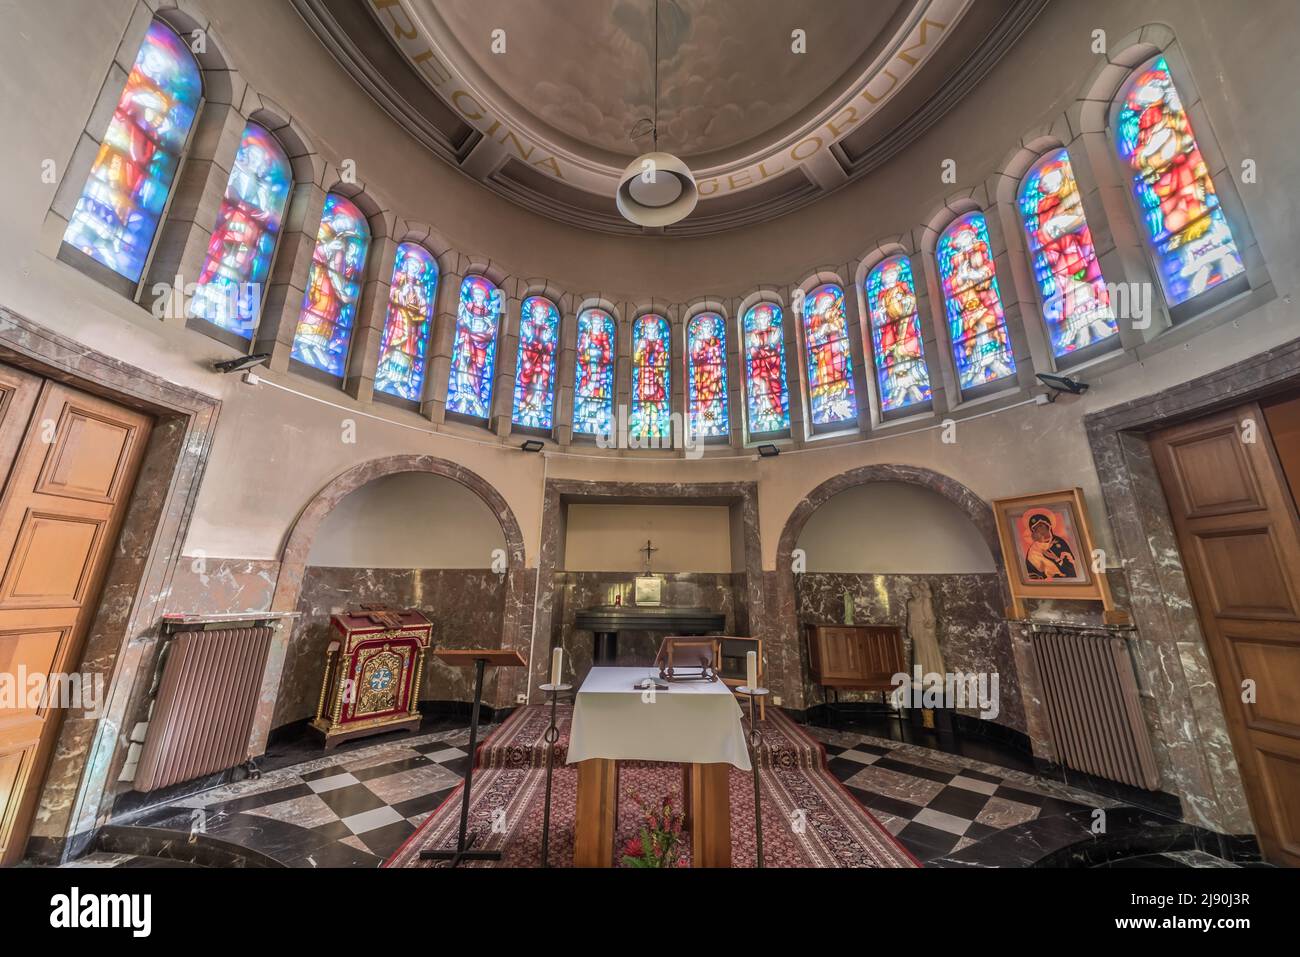 Jette, Brussels Capital Region - Belgium - 10 10 2019 Modern Gothic interior design of the Our Lady of Lourdes Roman Catholic church of Jette Stock Photo